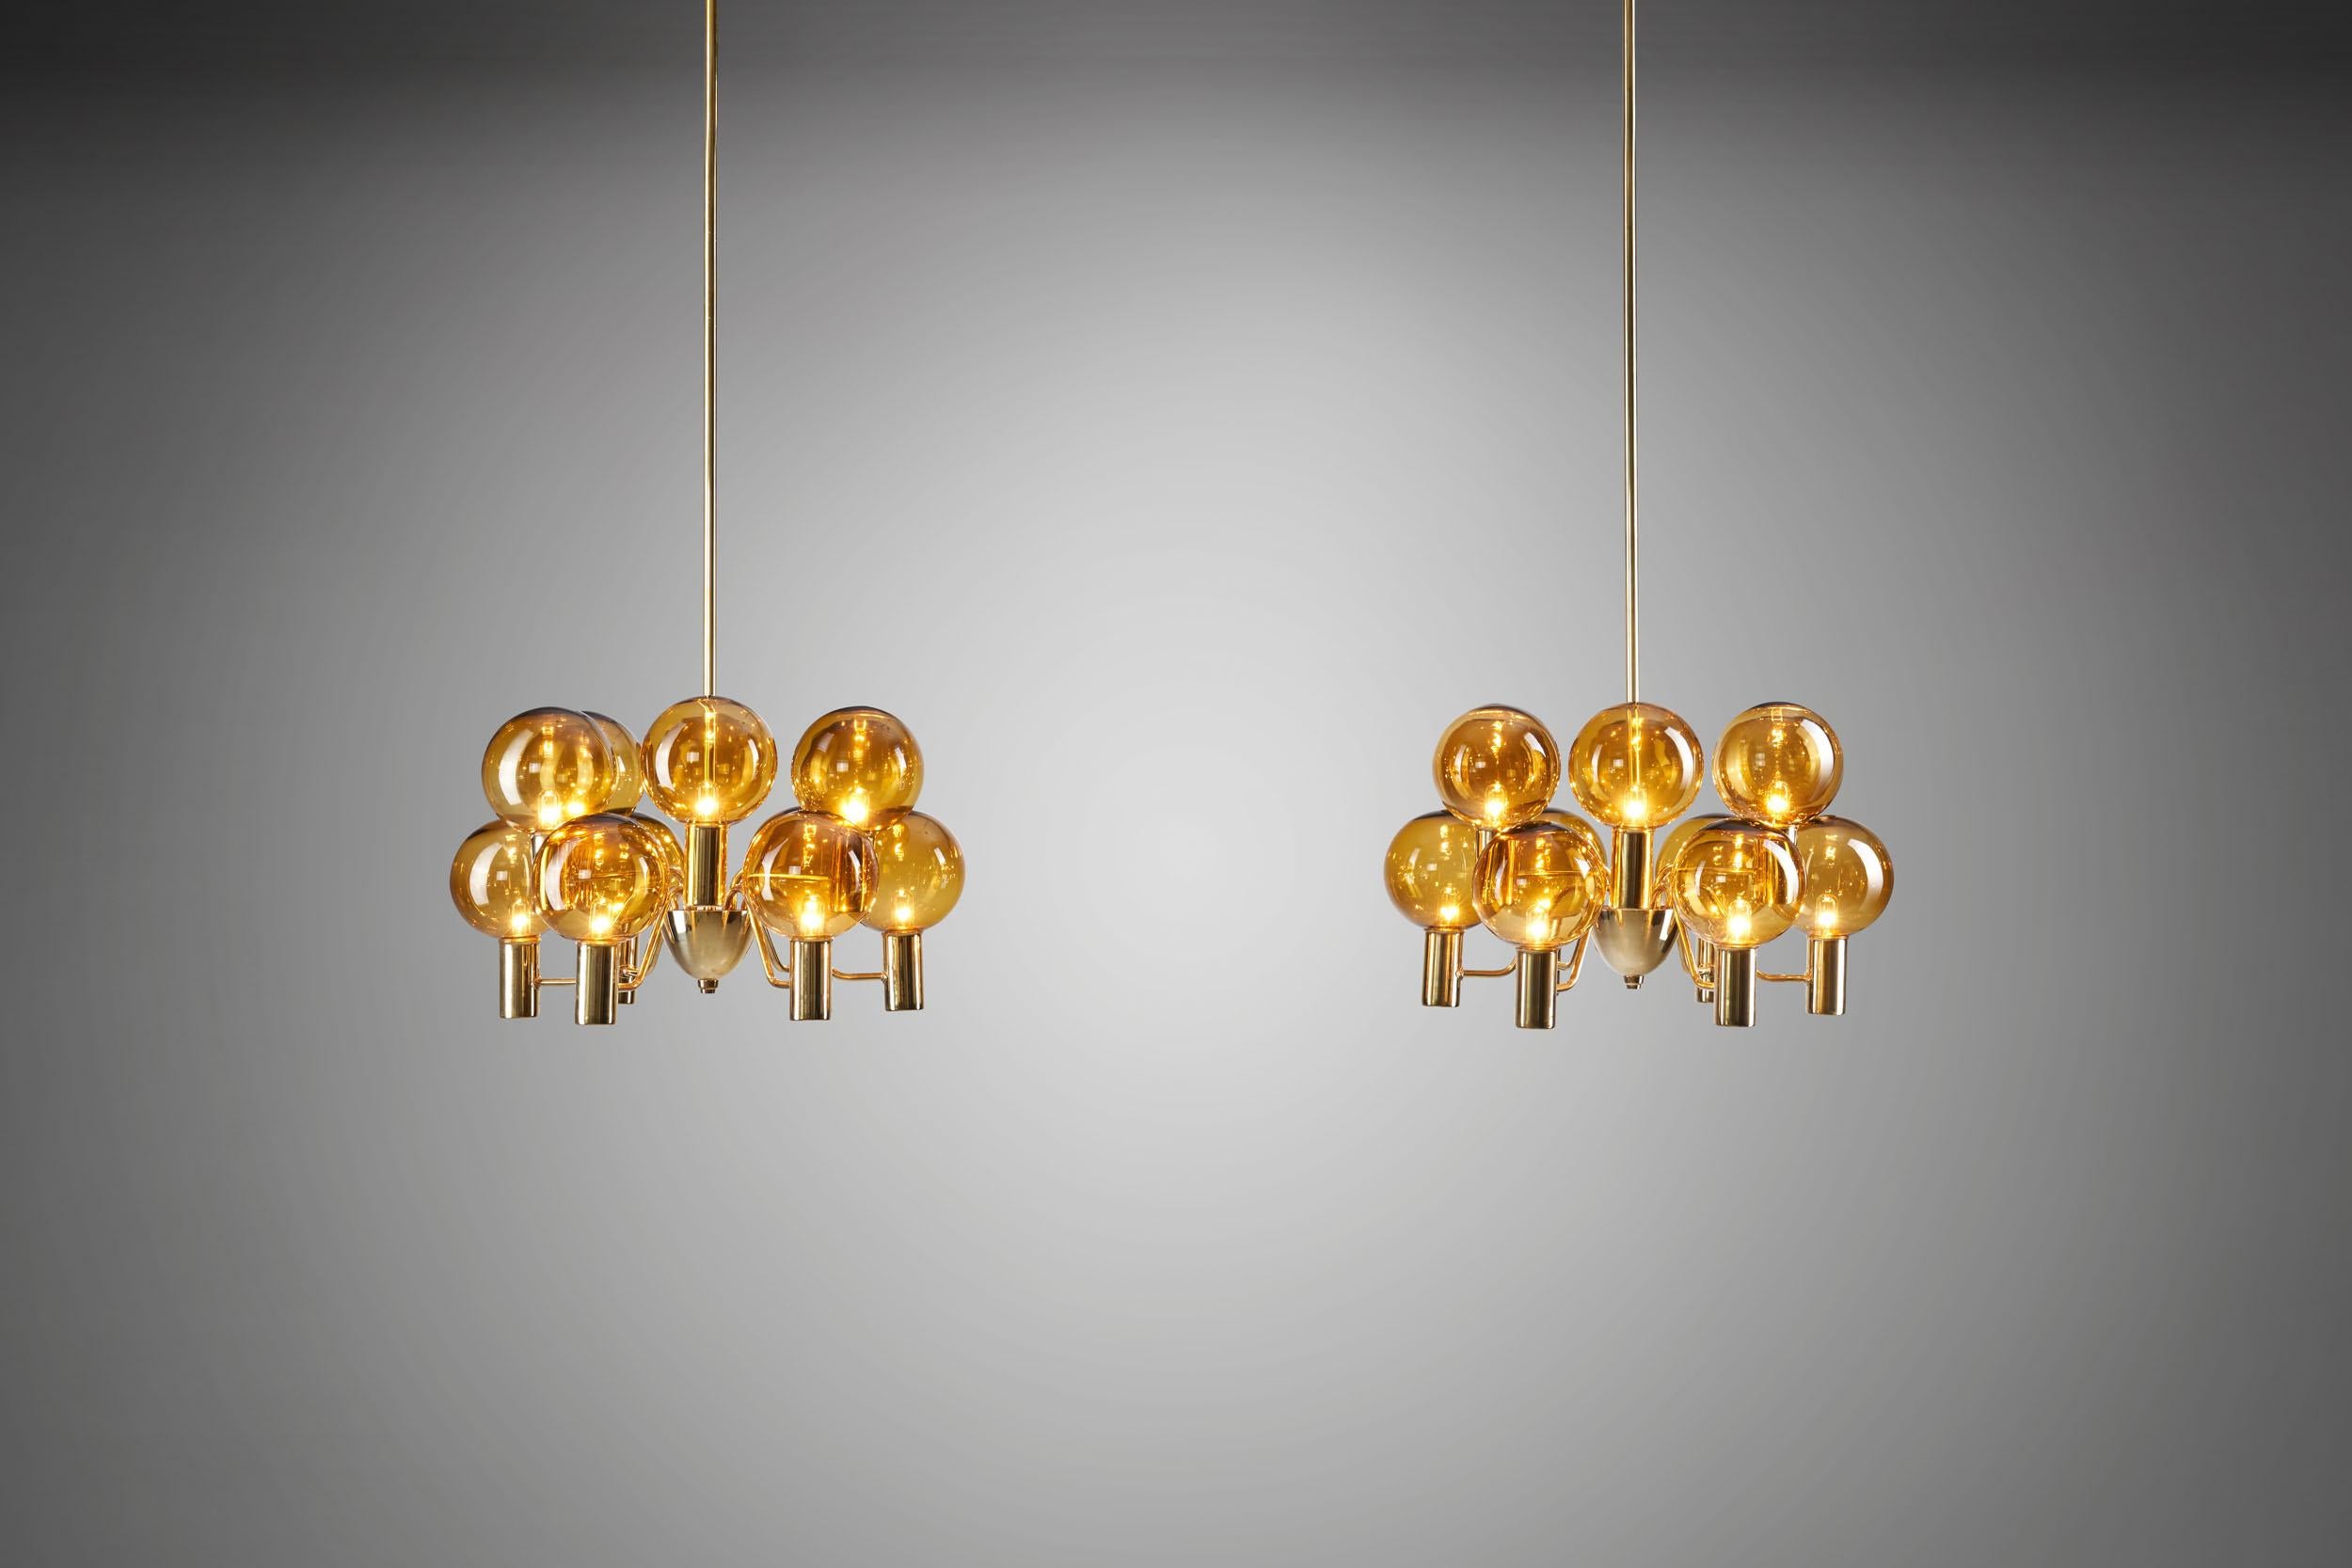 This pair of stunning brass and glass “Patricia” chandeliers was created in what we now call “the golden age of Scandinavian design”. Hans-Agne Jakobsson created Swedish lighting models that still define the era, and this model is no